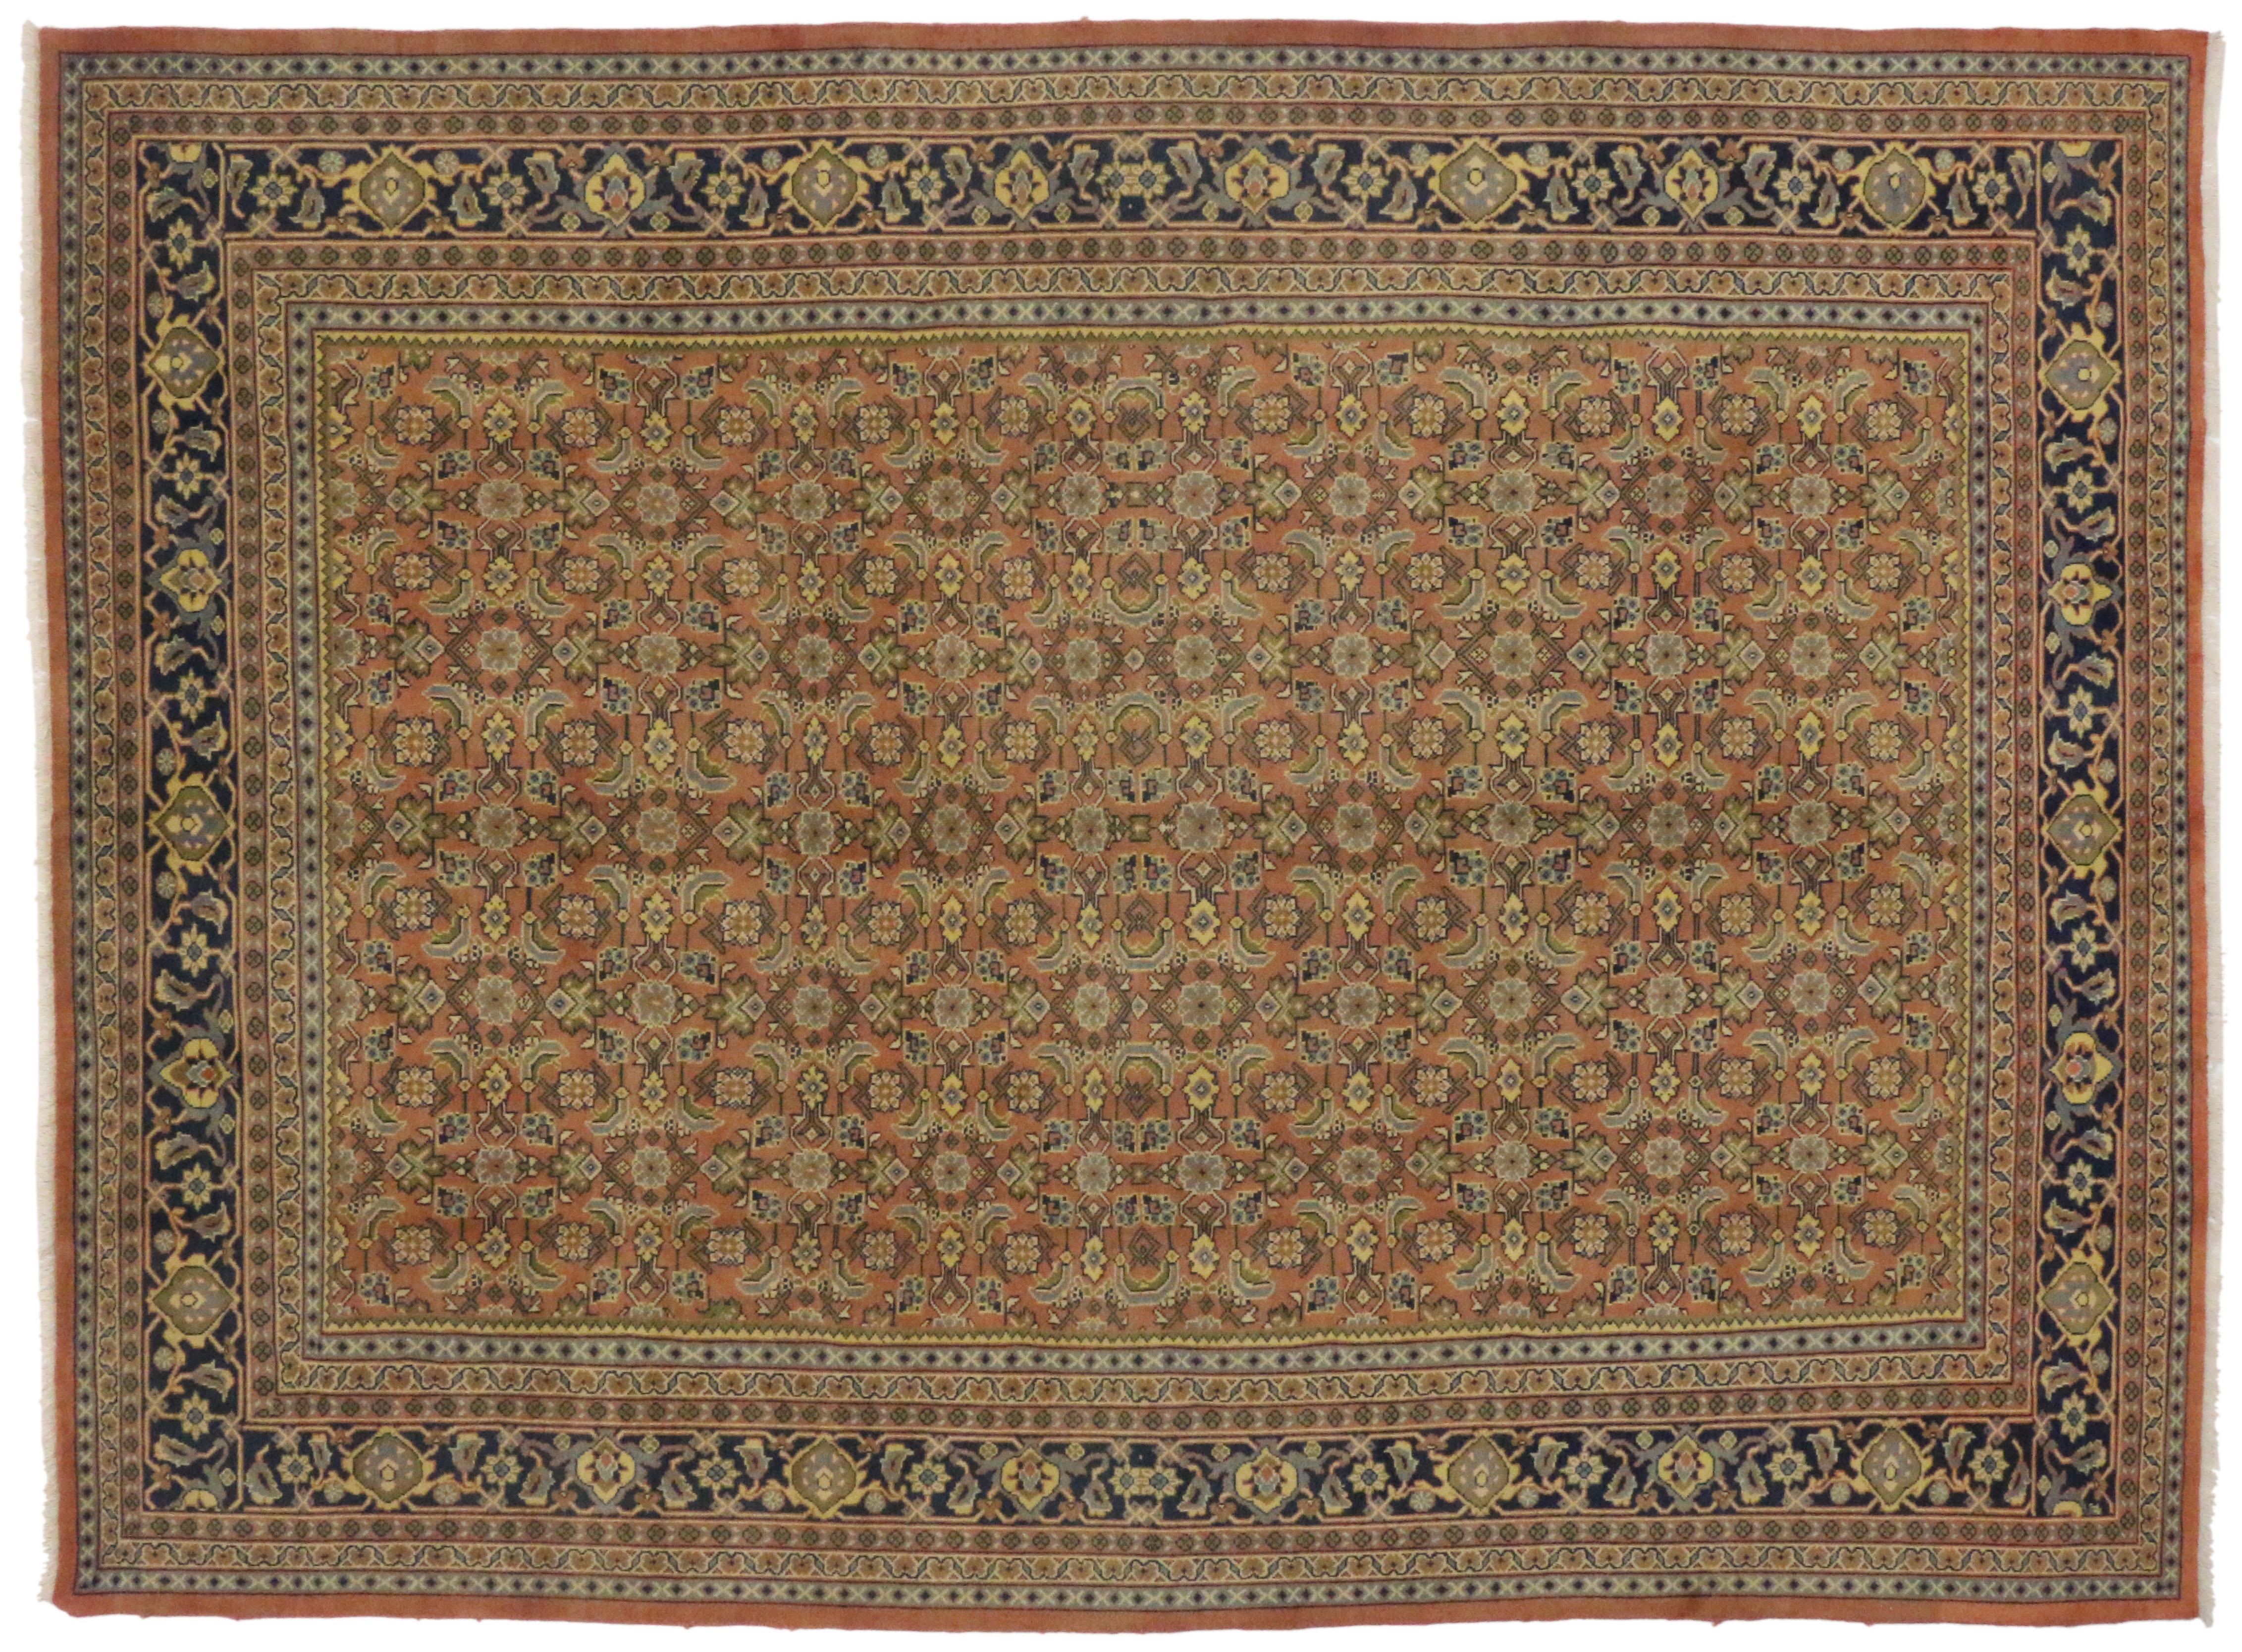 Vintage Persian Mahal Area Rug with Arts & Crafts Style In Good Condition For Sale In Dallas, TX